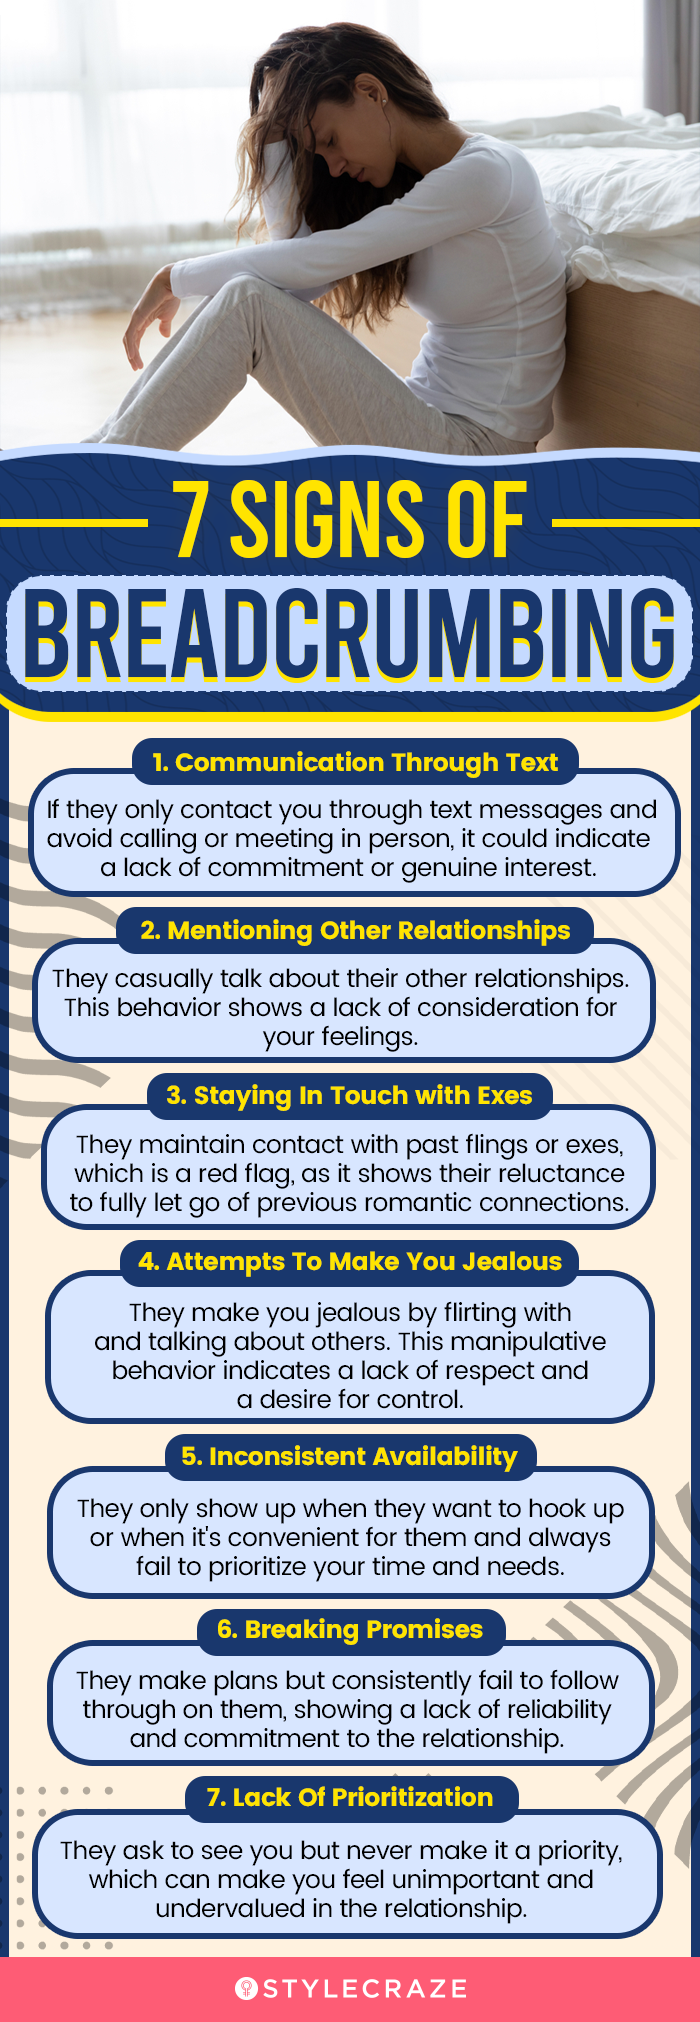 7 signs of breadcrumbing (infographic)